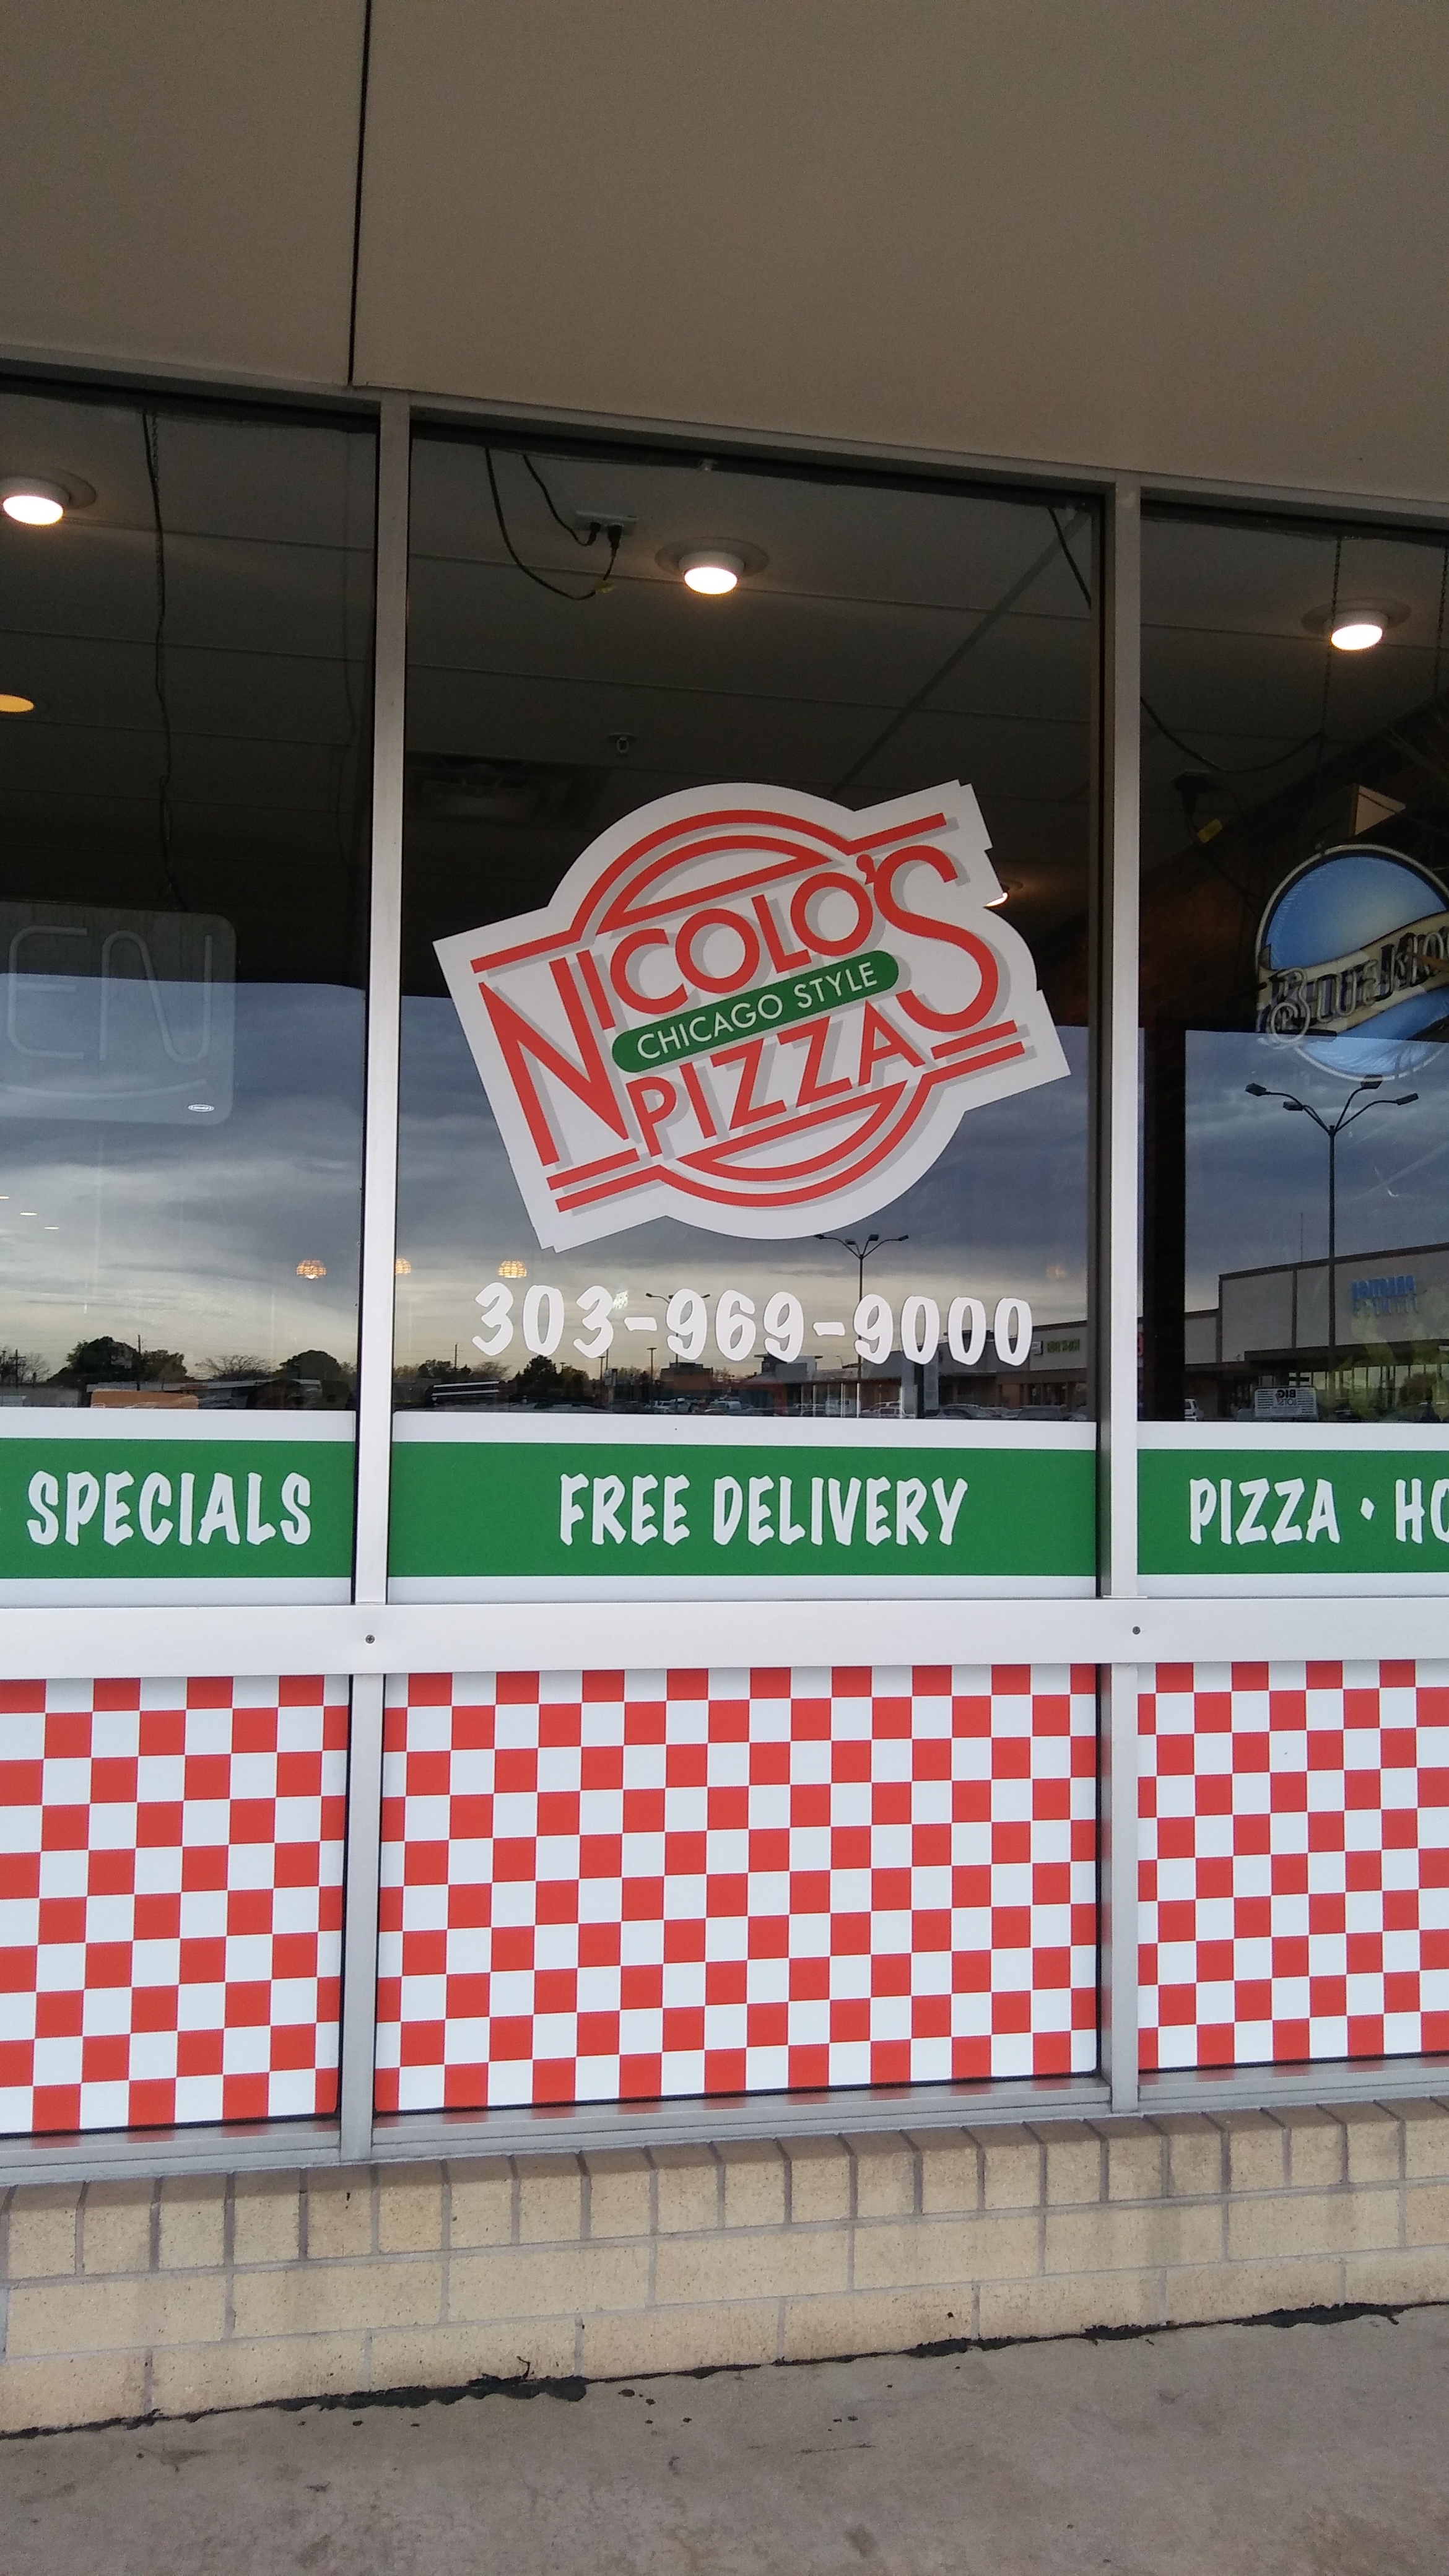 Nicolo's Chicago Style Pizza Coupons near me in Lakewood ...